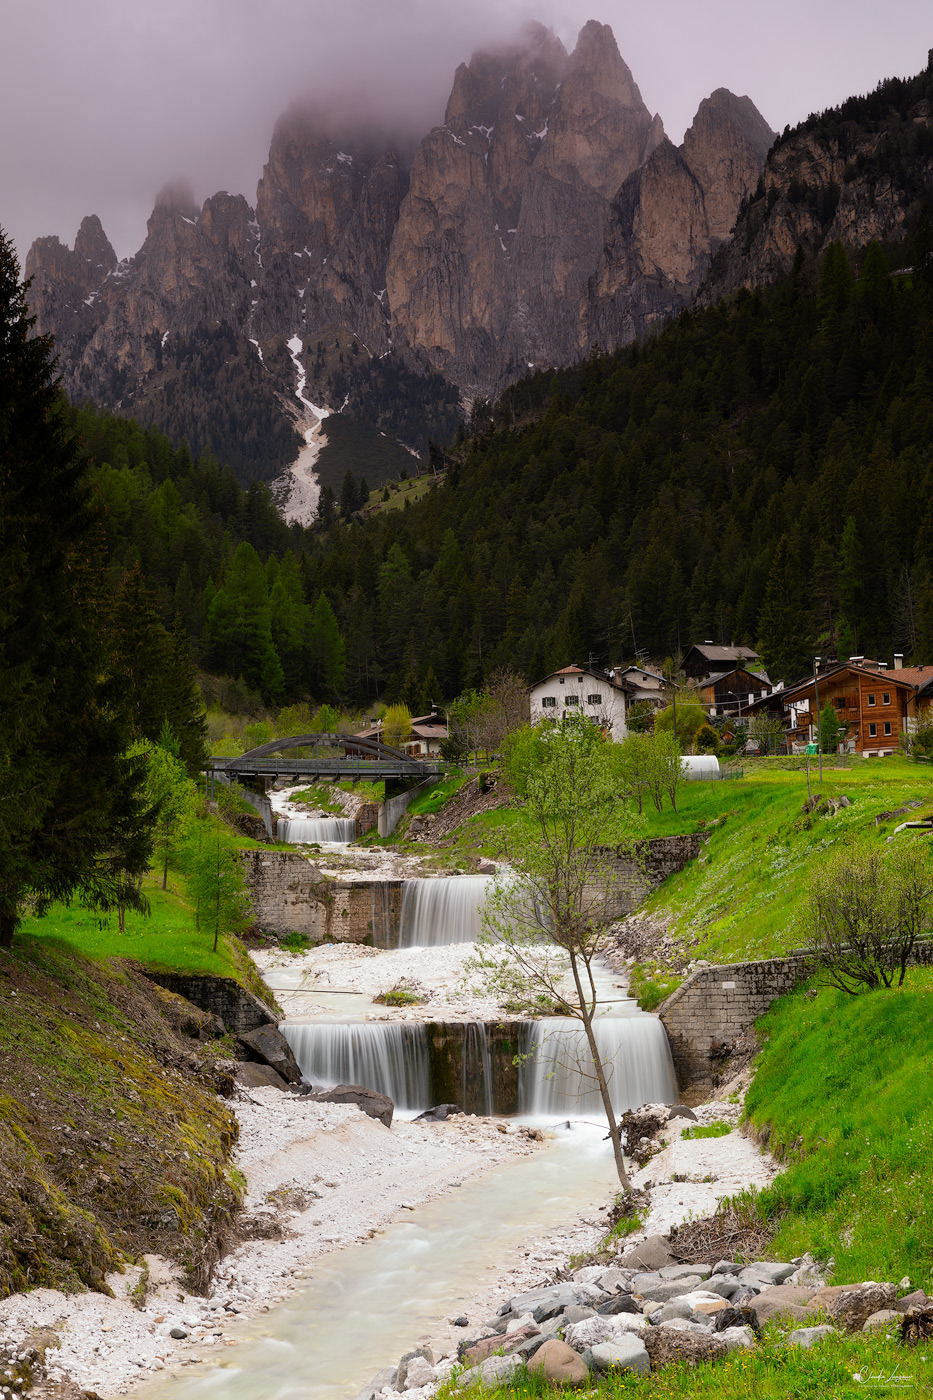 View of The Dolomites Mountains in South Tyrol in Italy.